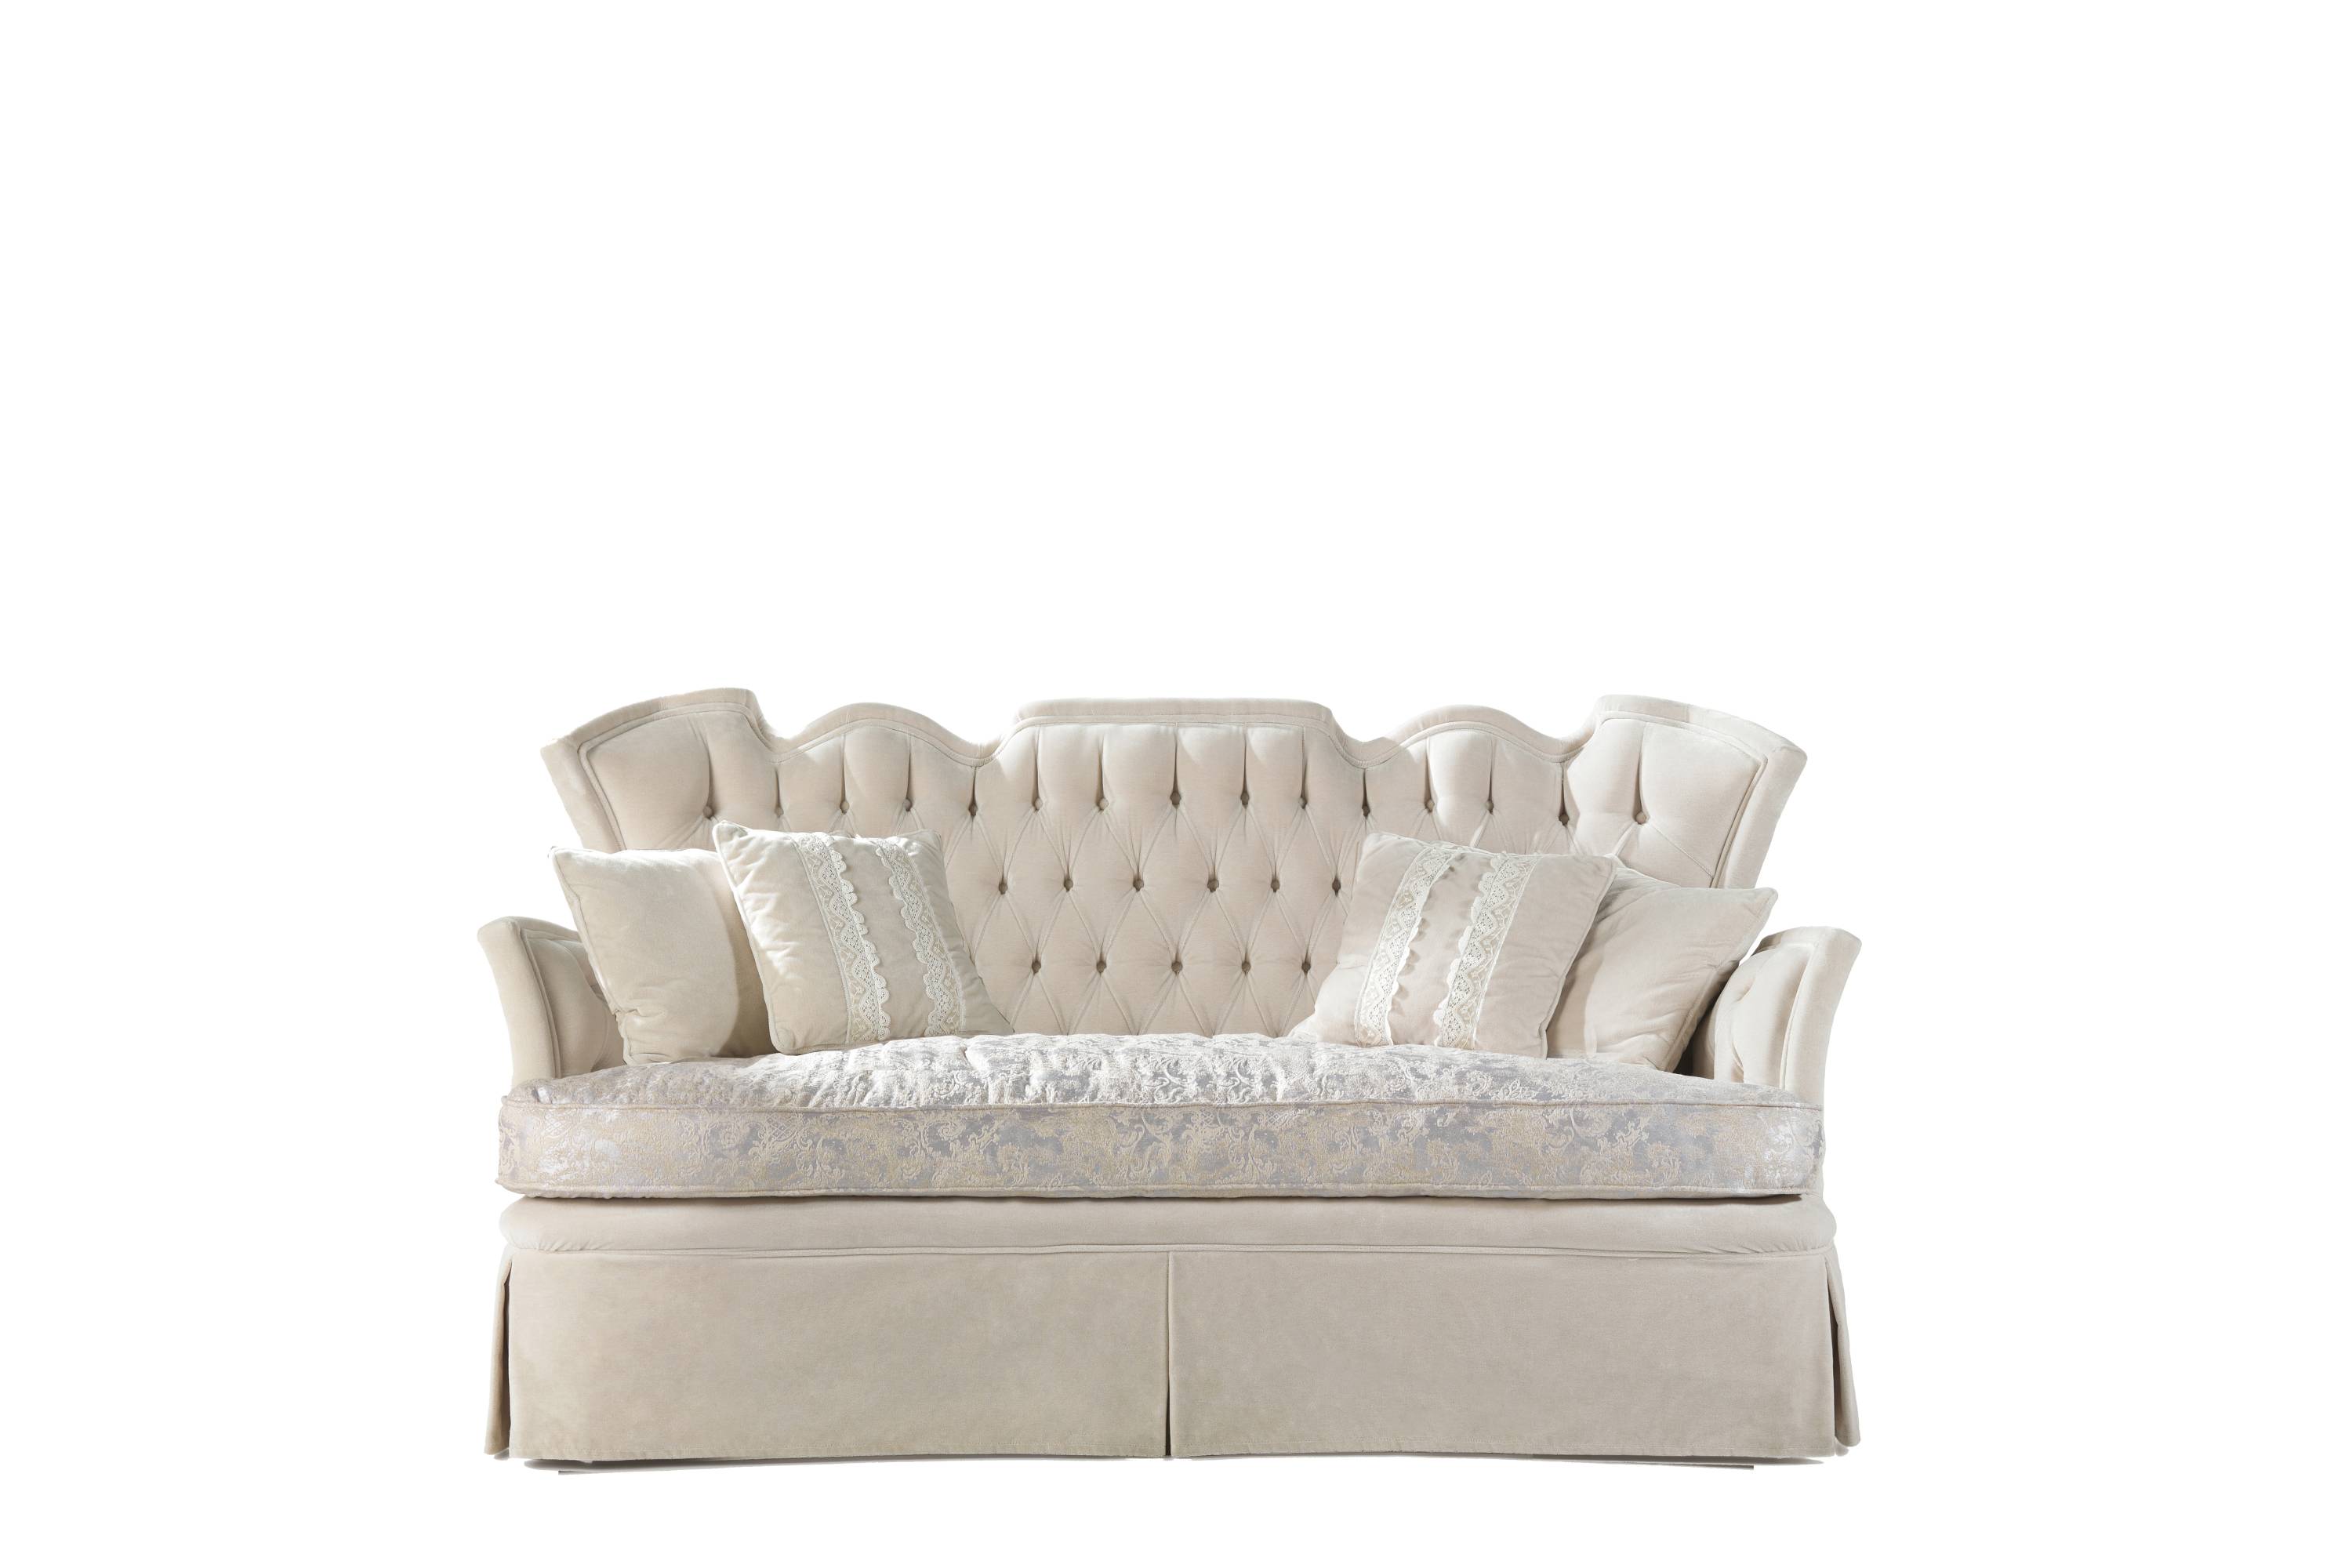 LA GRANDE DAME 2-seater sofa - 3-seater sofa – Transform your space with luxury Made in Italy classic sofas of Domus collection.